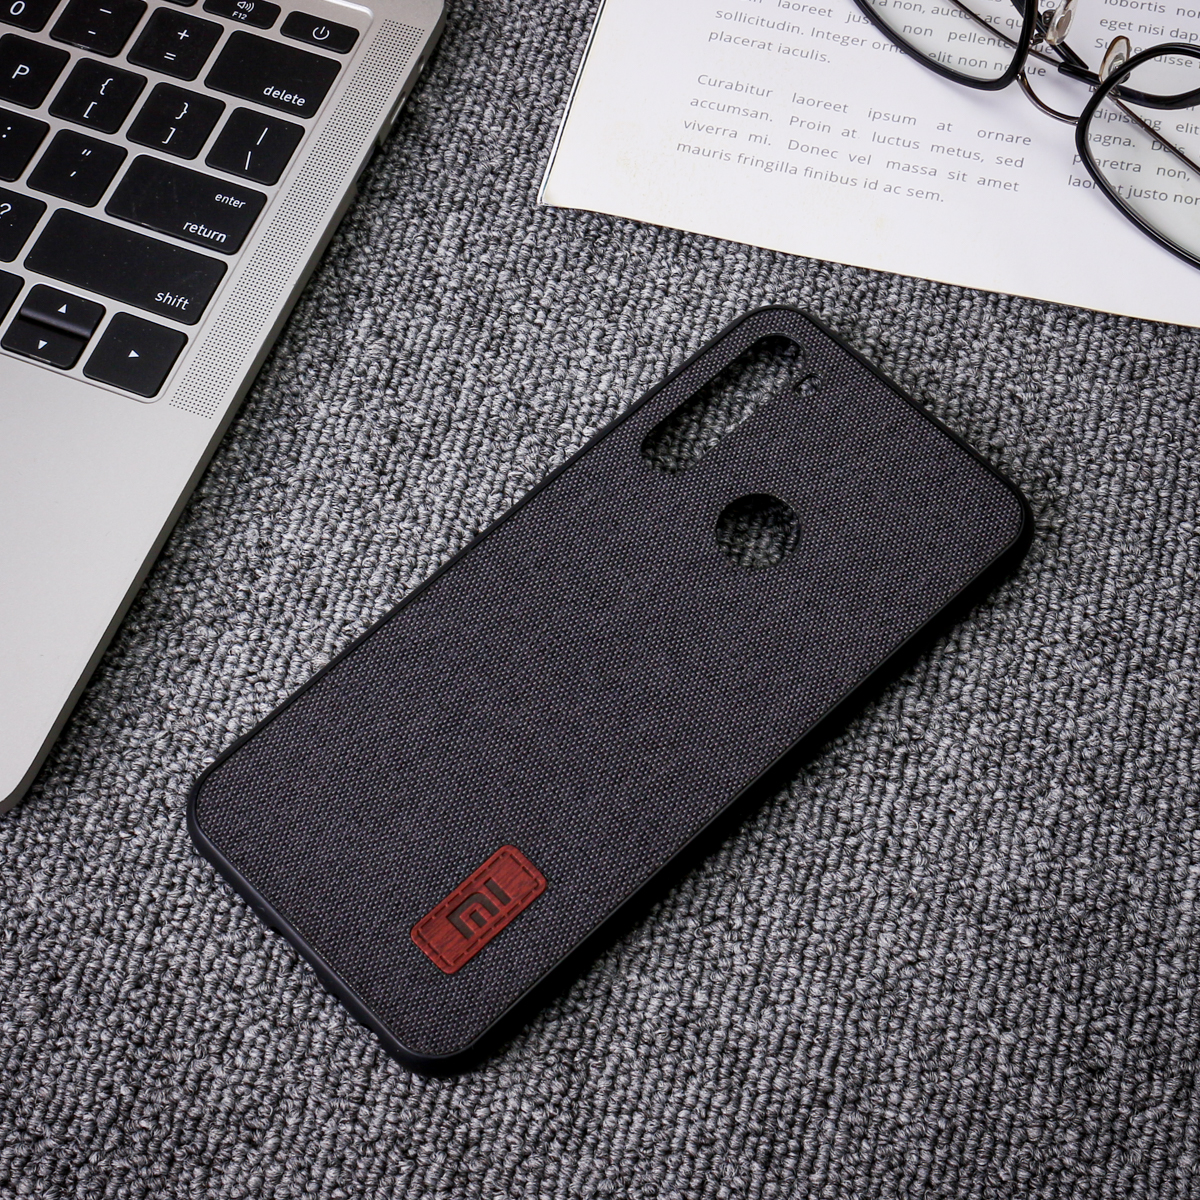 Bakeey Luxury Fabric Splice Soft Silicone Edge Shockproof Protective Case For Xiaomi Redmi Note 8T